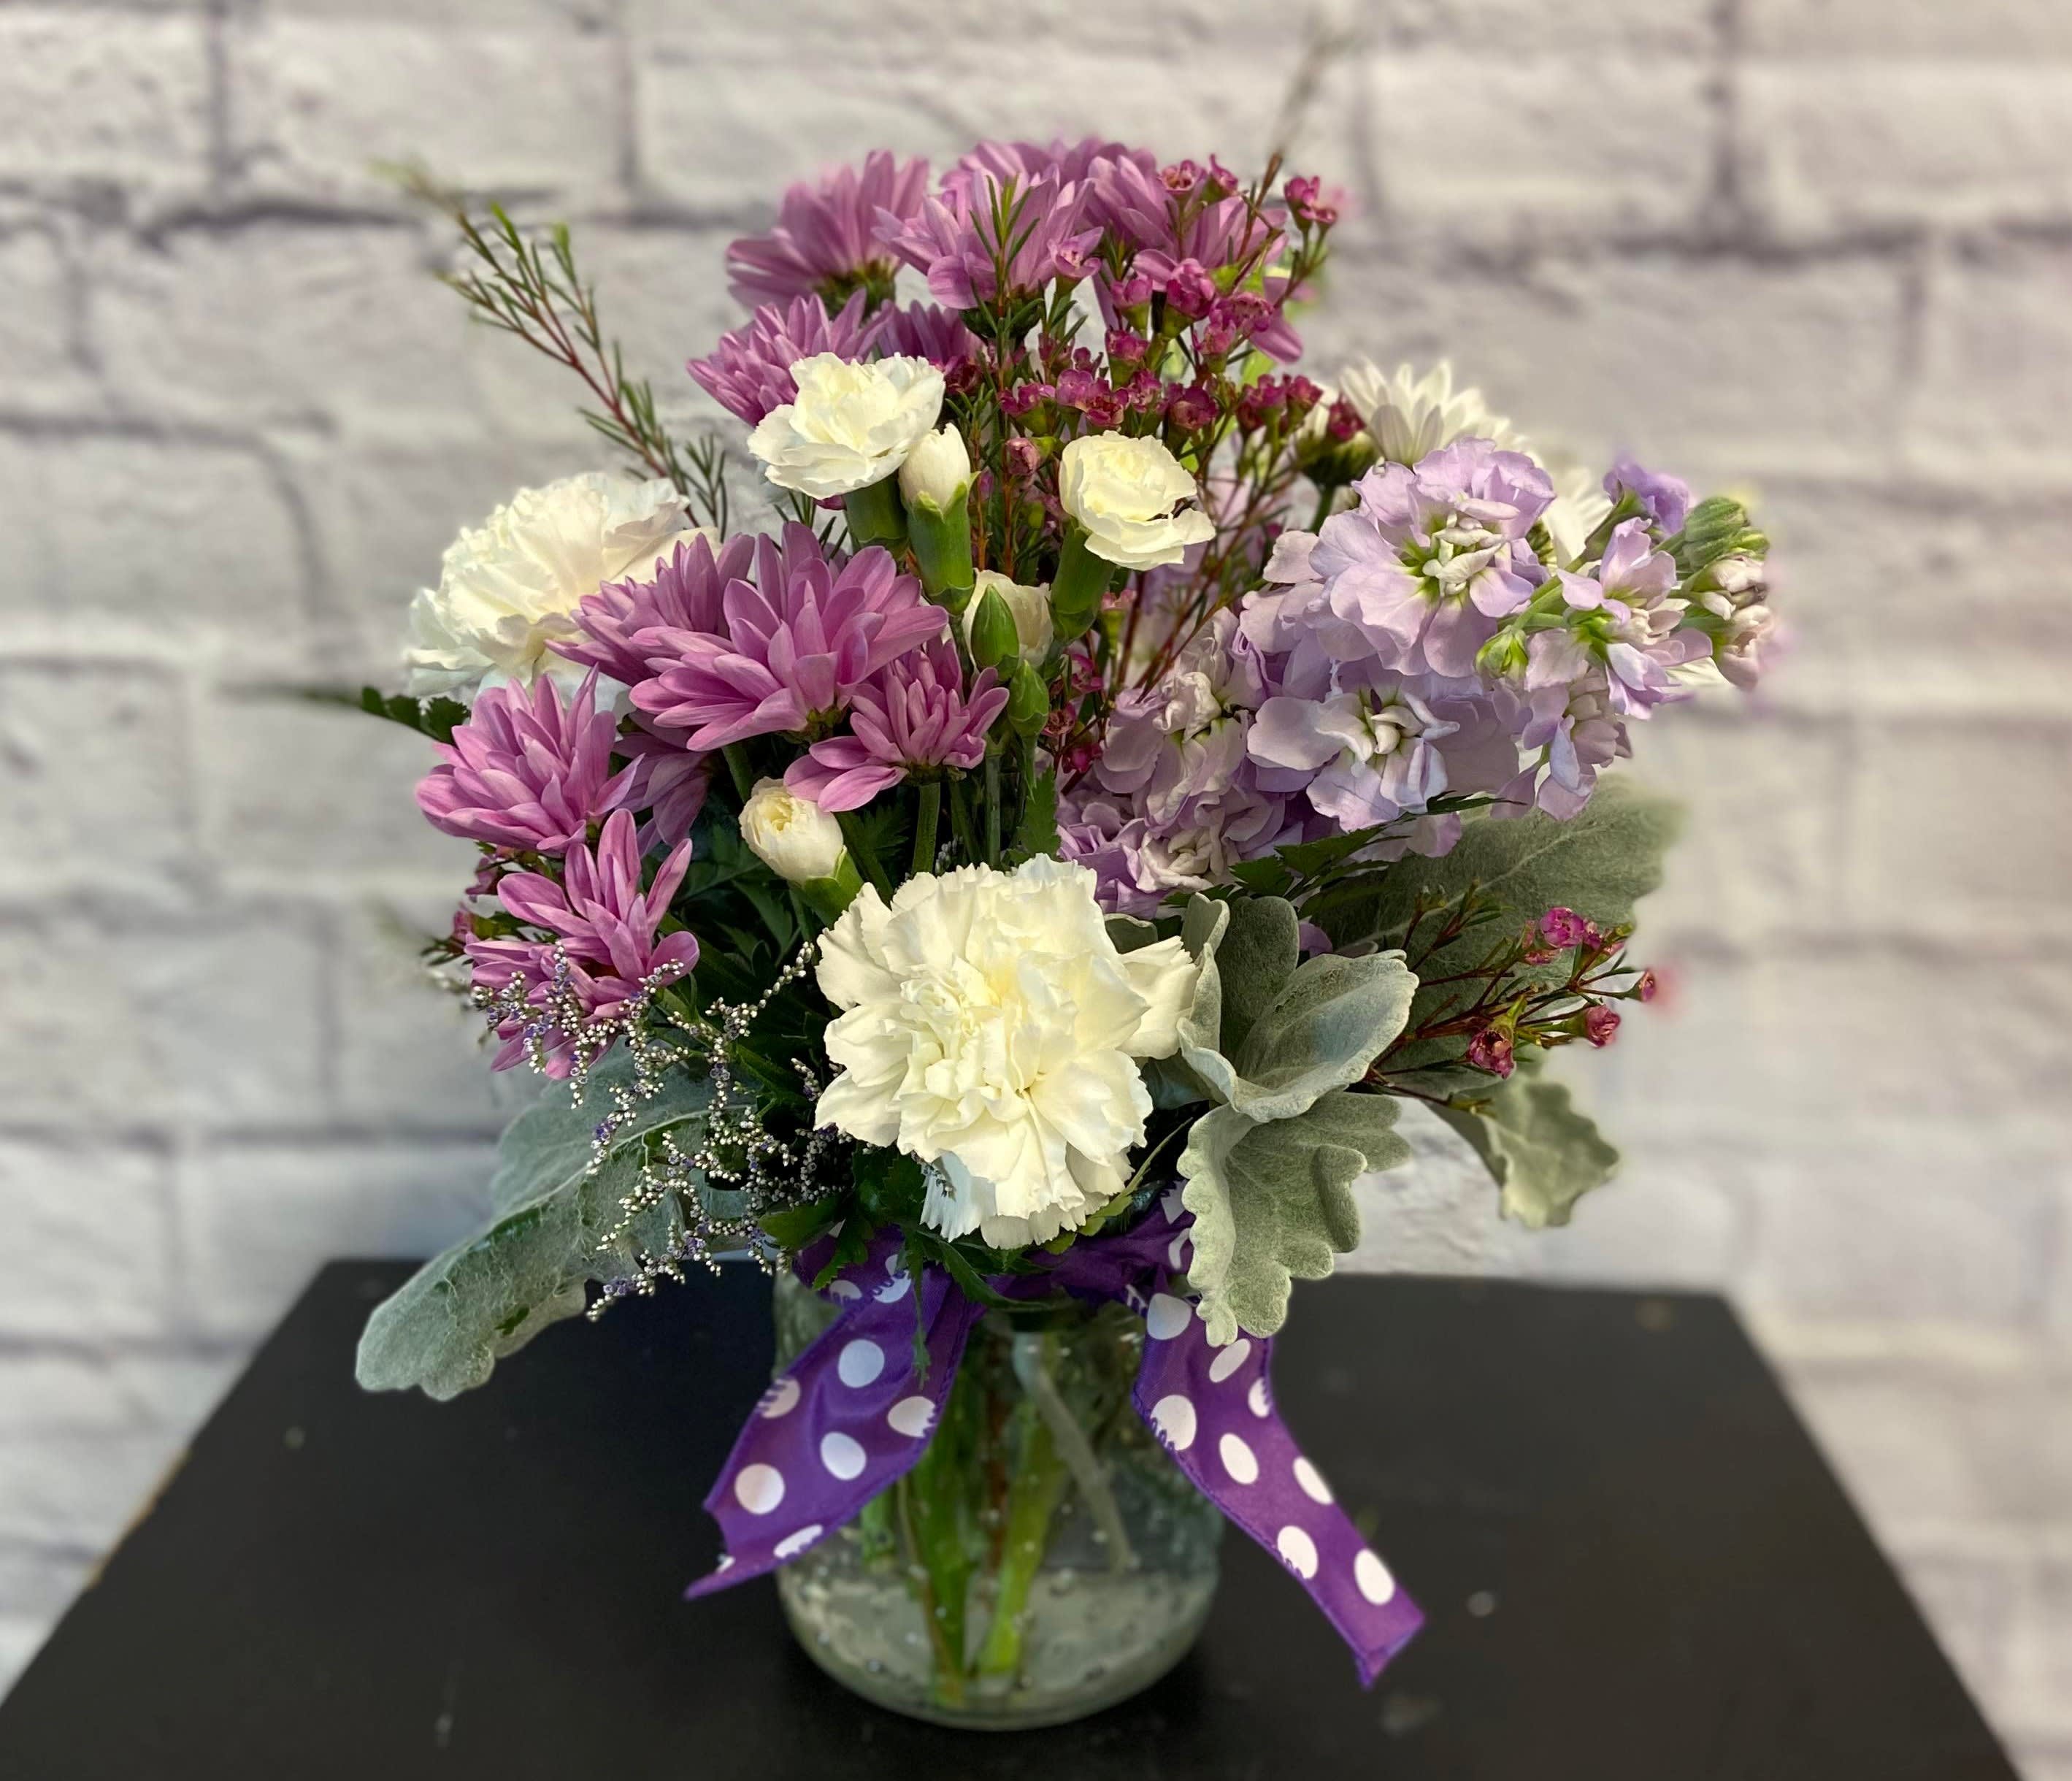 Lovely Lavender  - Beautiful lavender, white and purple bouquet...great for any occasion!